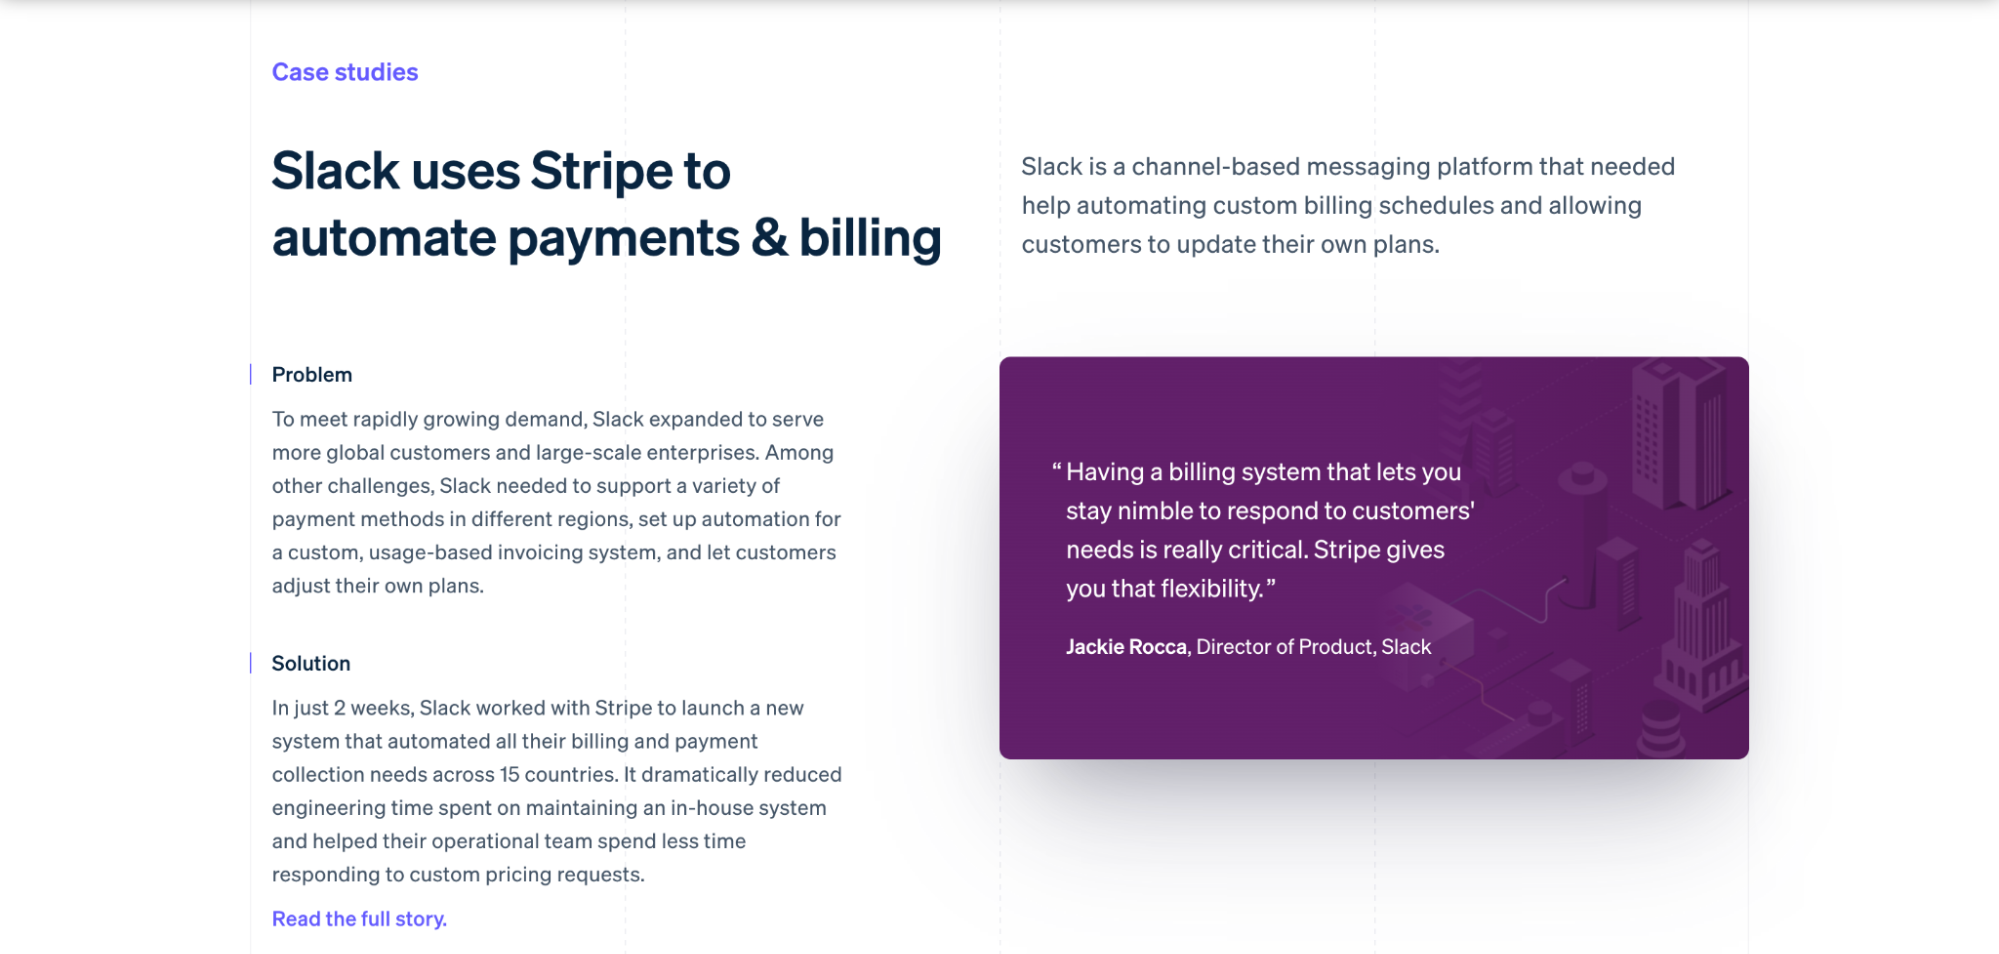 screenshot of Stripe's website showing a case study on how Slack uses Stripe in their business